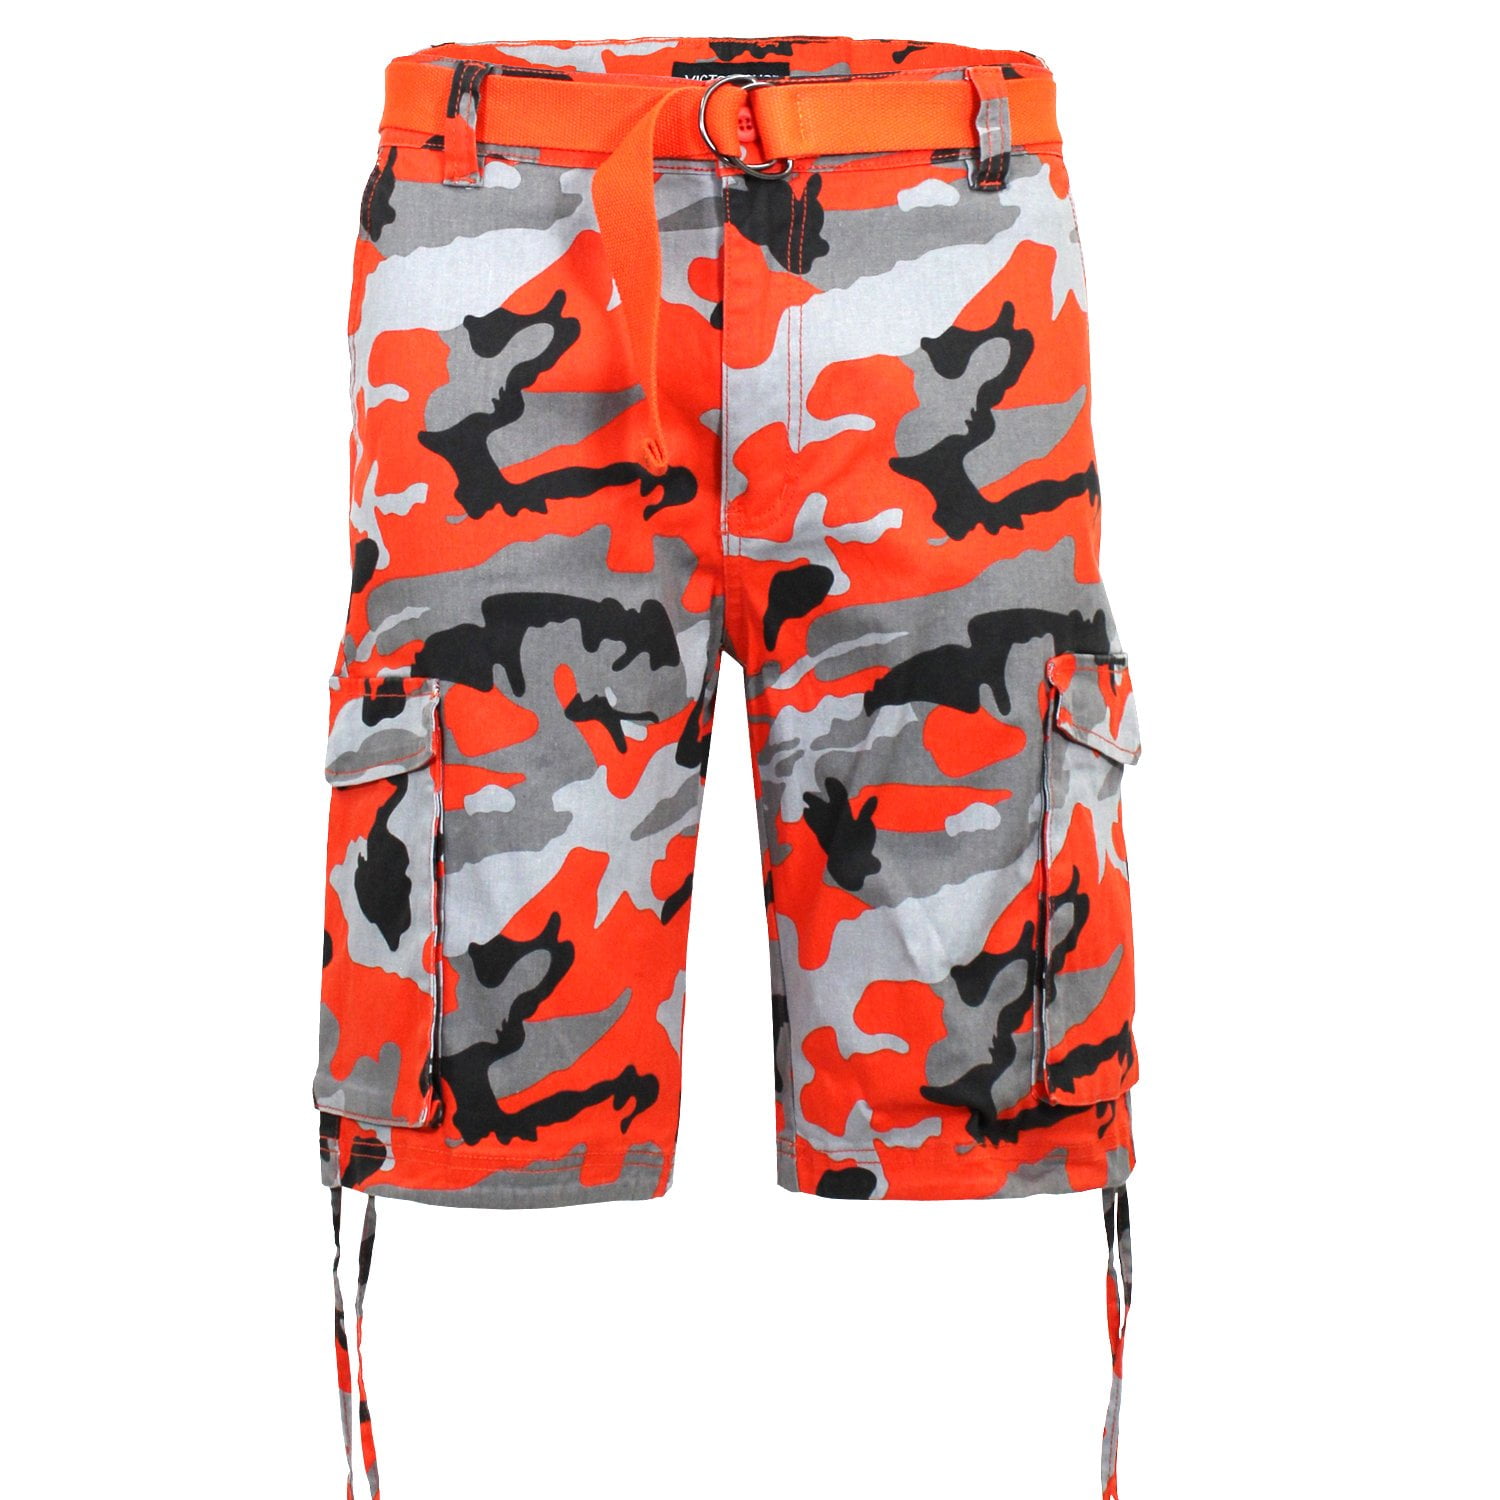 Victorious Men's Belted Twill Camo Cargo Short DS2065 - Red - 44